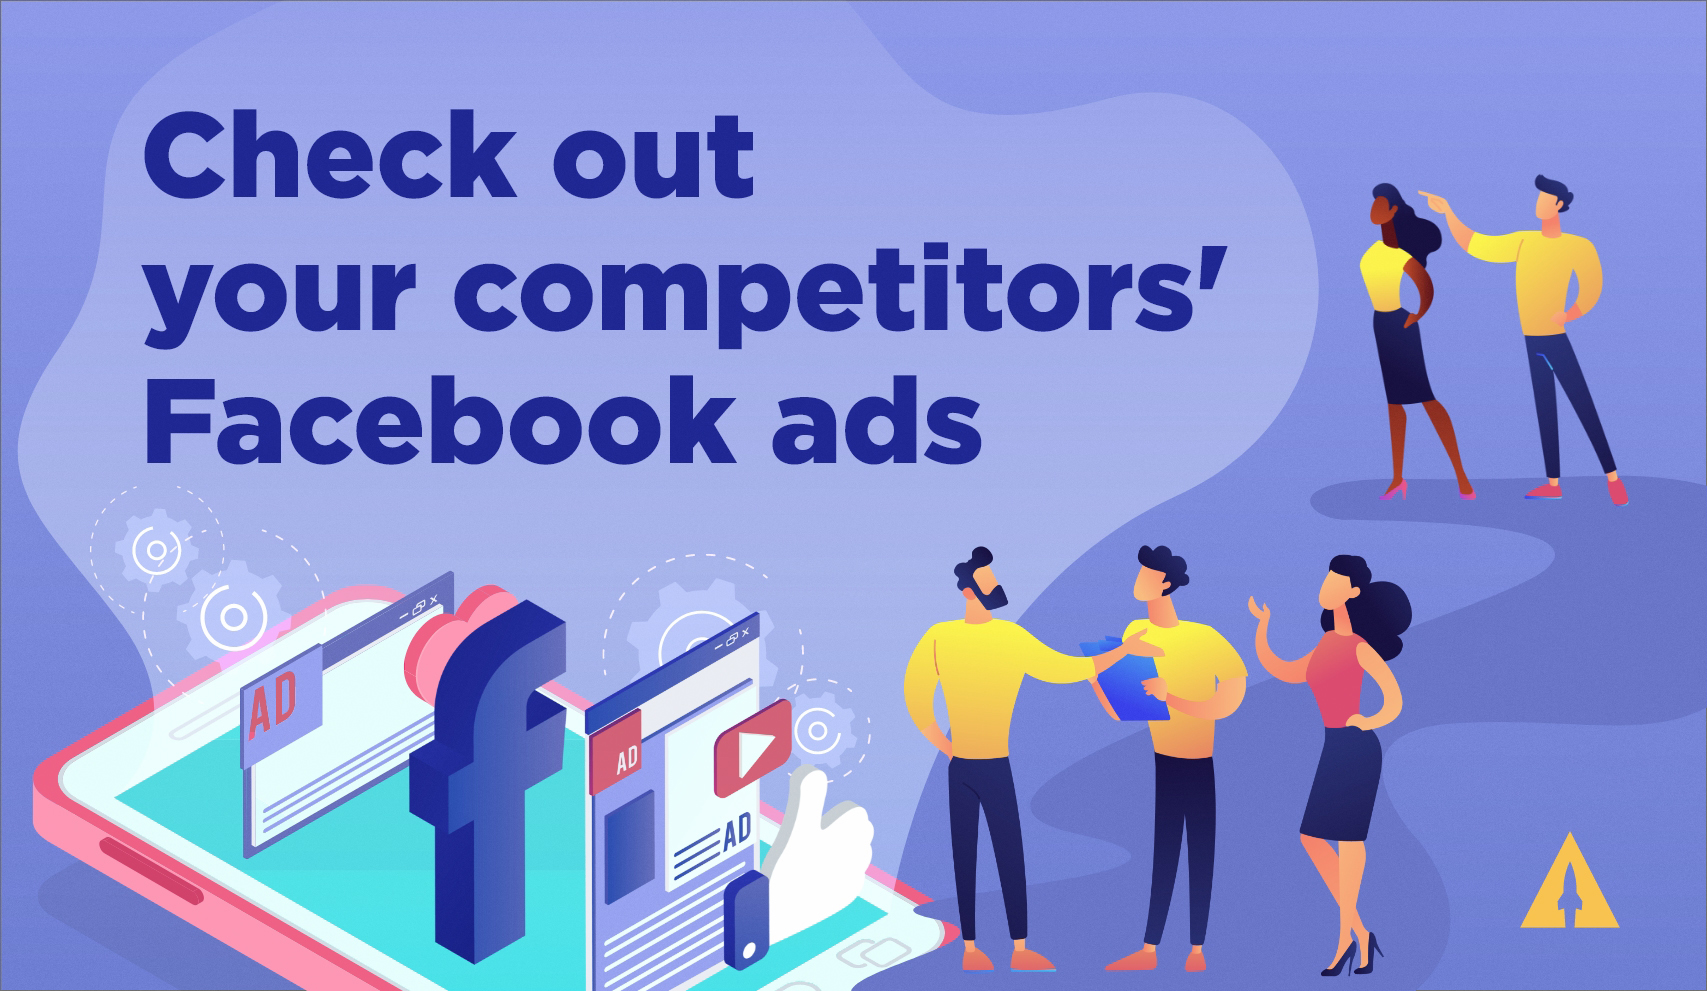 Check out your competitors’ Facebook ads